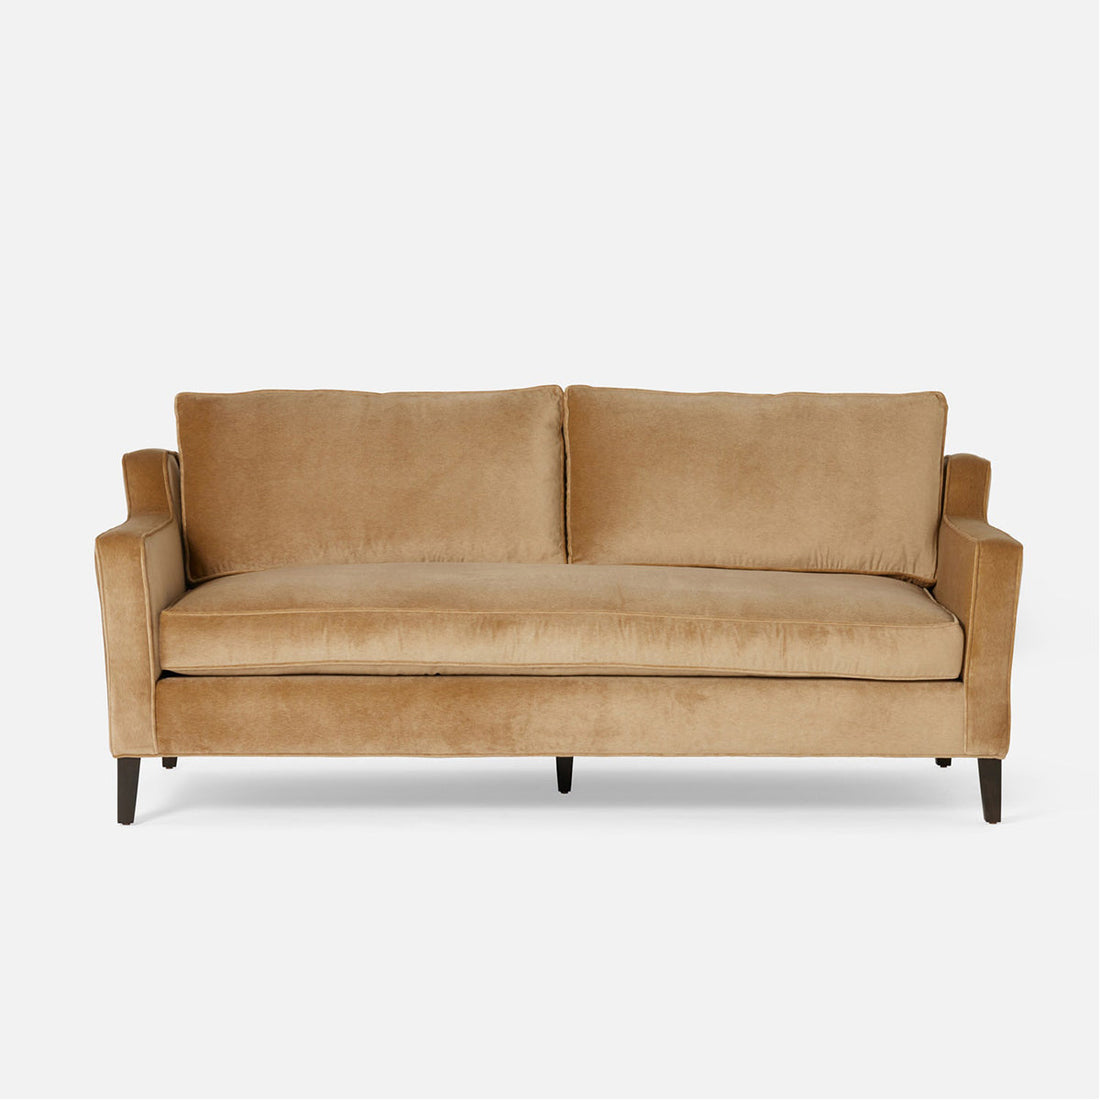 Made Goods Holbeck Sofa in Humboldt Cotton Jute